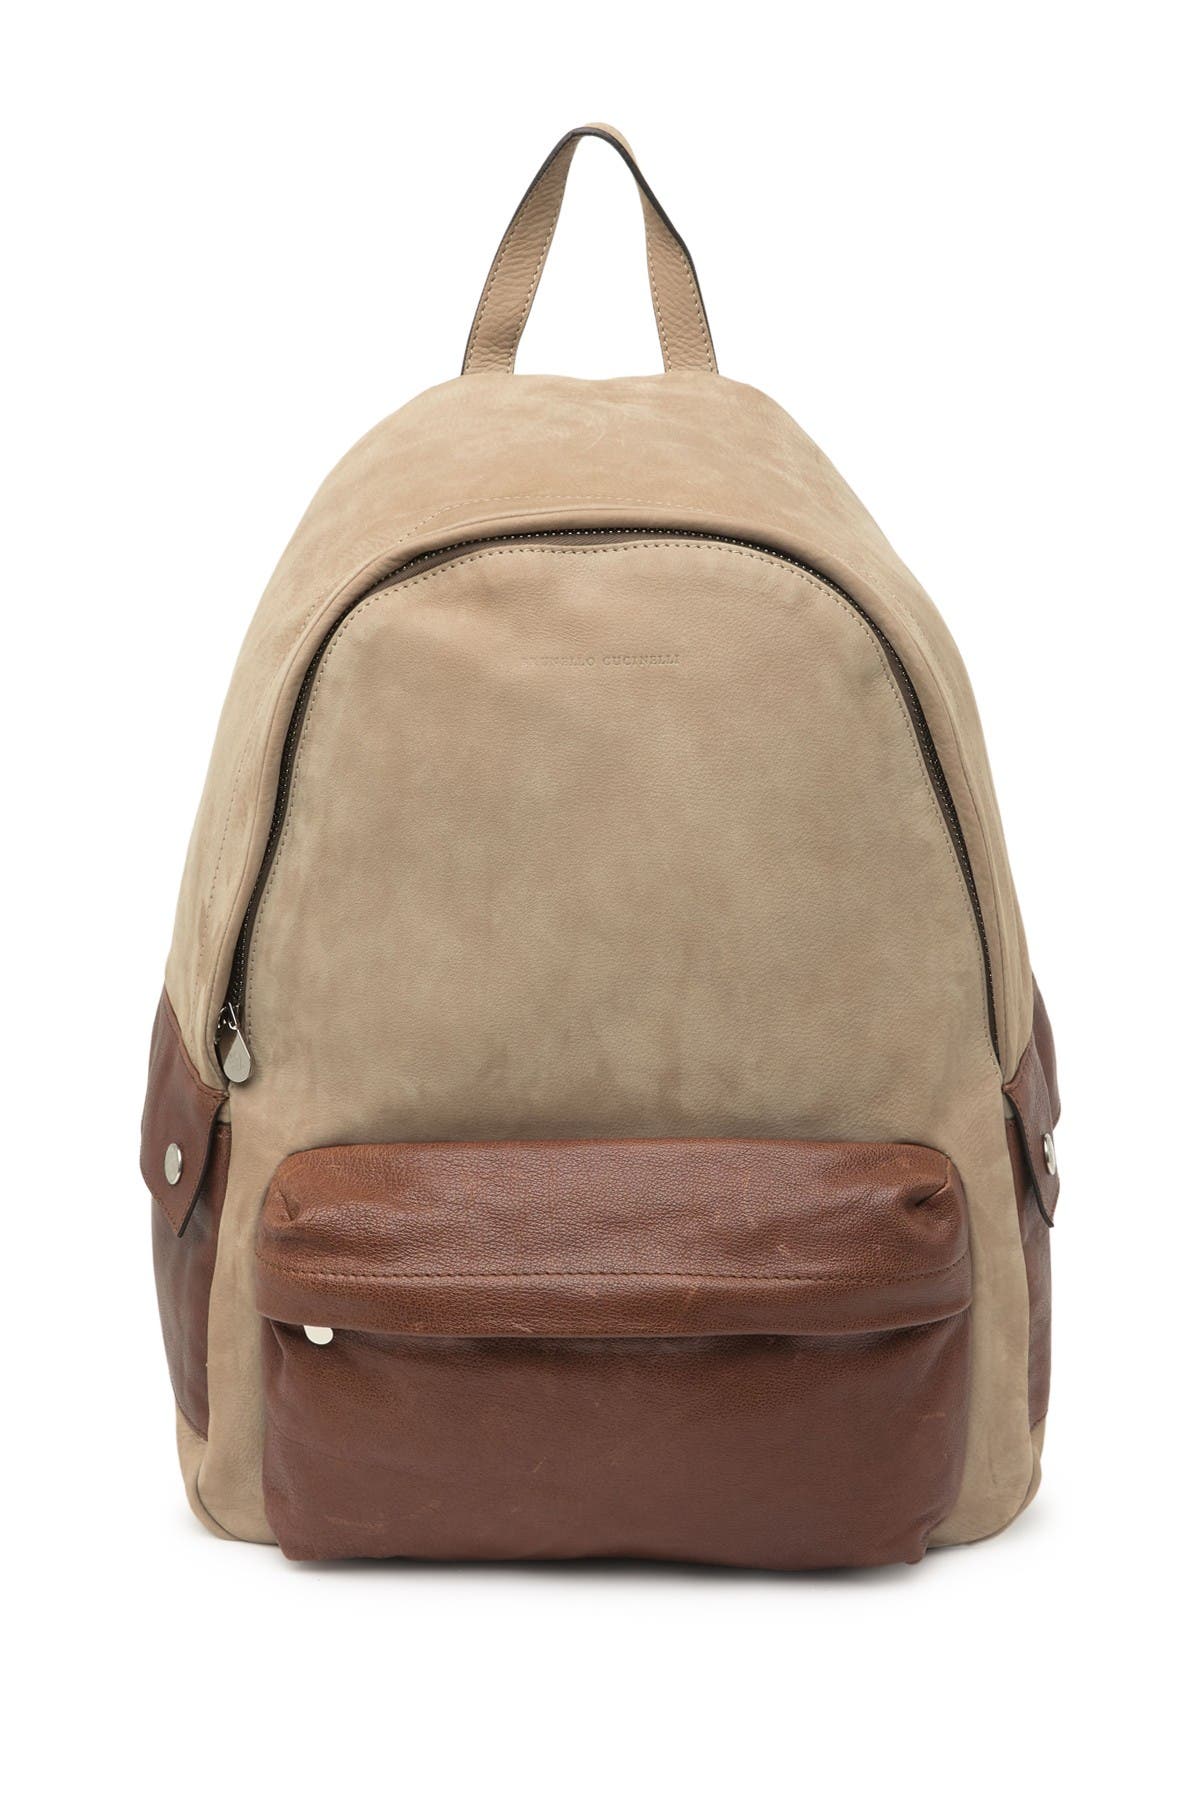 Brunello Cucinelli Suede & Leather Backpack In Tan